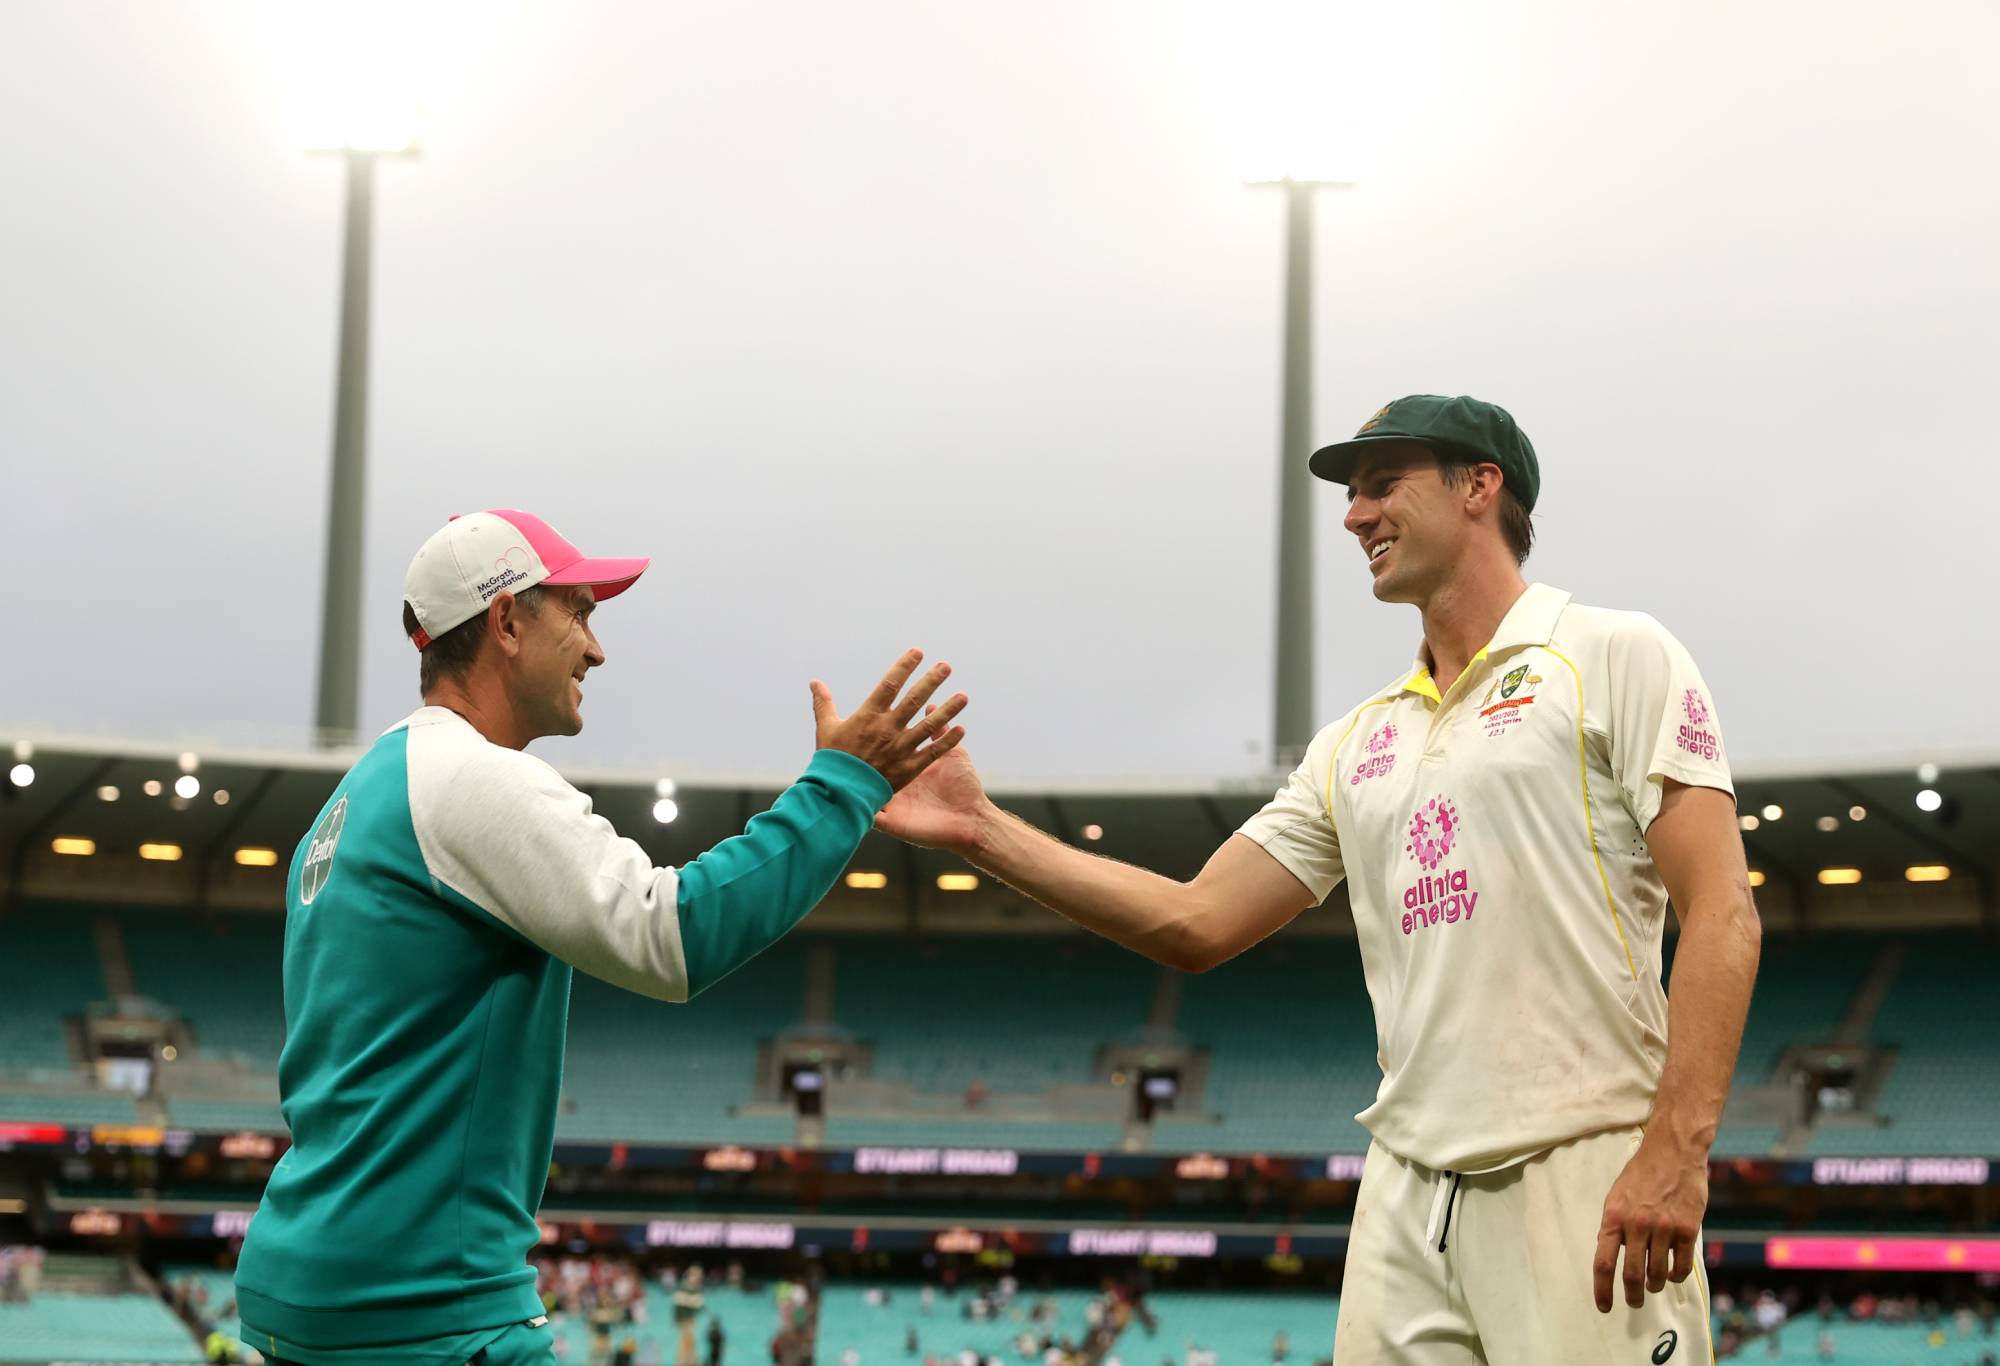 Head coach Justin Langer shakes hands with Pat Cummins of Australia after the match ended in a draw on day five of the Fourth Test Match in the Ashes series between Australia and England at Sydney Cricket Ground on January 09, 2022 in Sydney, Australia. (Photo by Mark Kolbe/Getty Images)